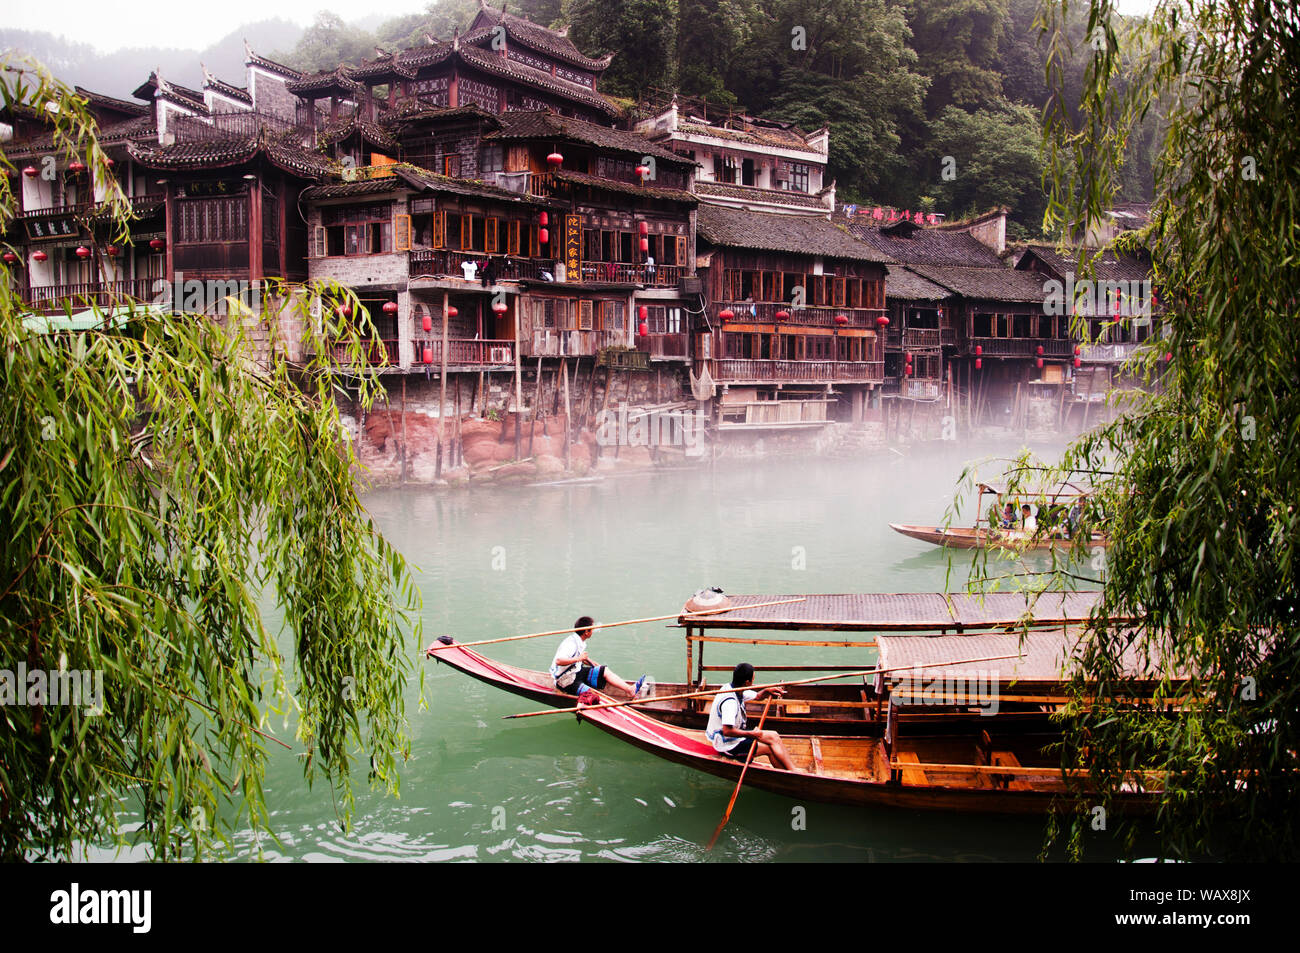 Fenghuang, Hunan, China ancient town. It was built in 1704, and was added to the UNESCO World Heritage Tentative List on March 28, 2008. Photo shot on Stock Photo